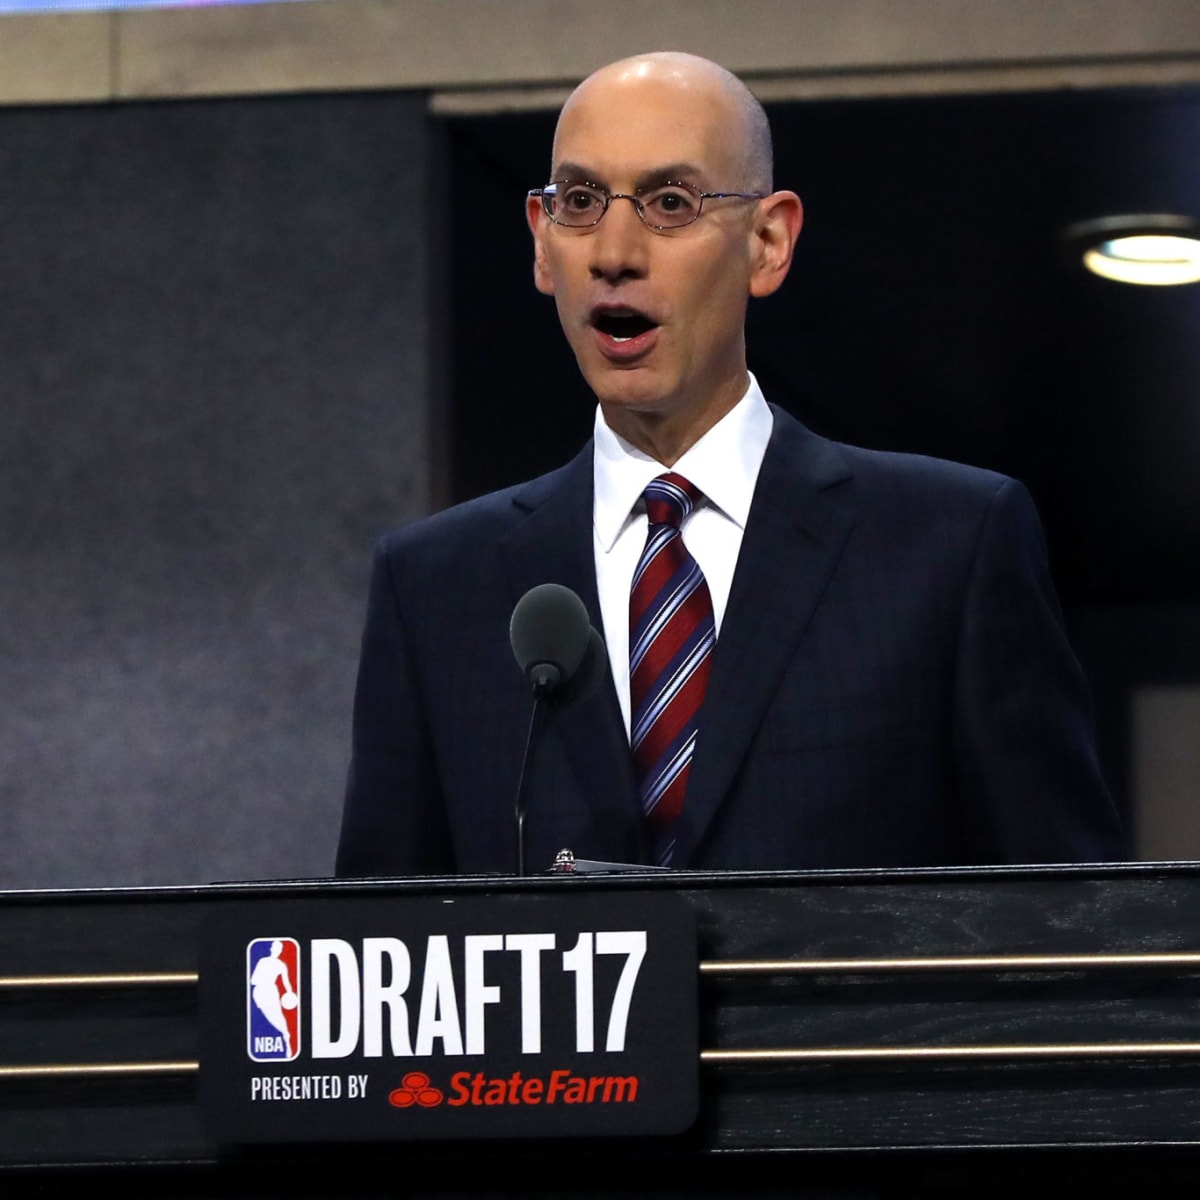 The NBA Draft Is Missing 2 Picks This Year - Here's Why - The Spun